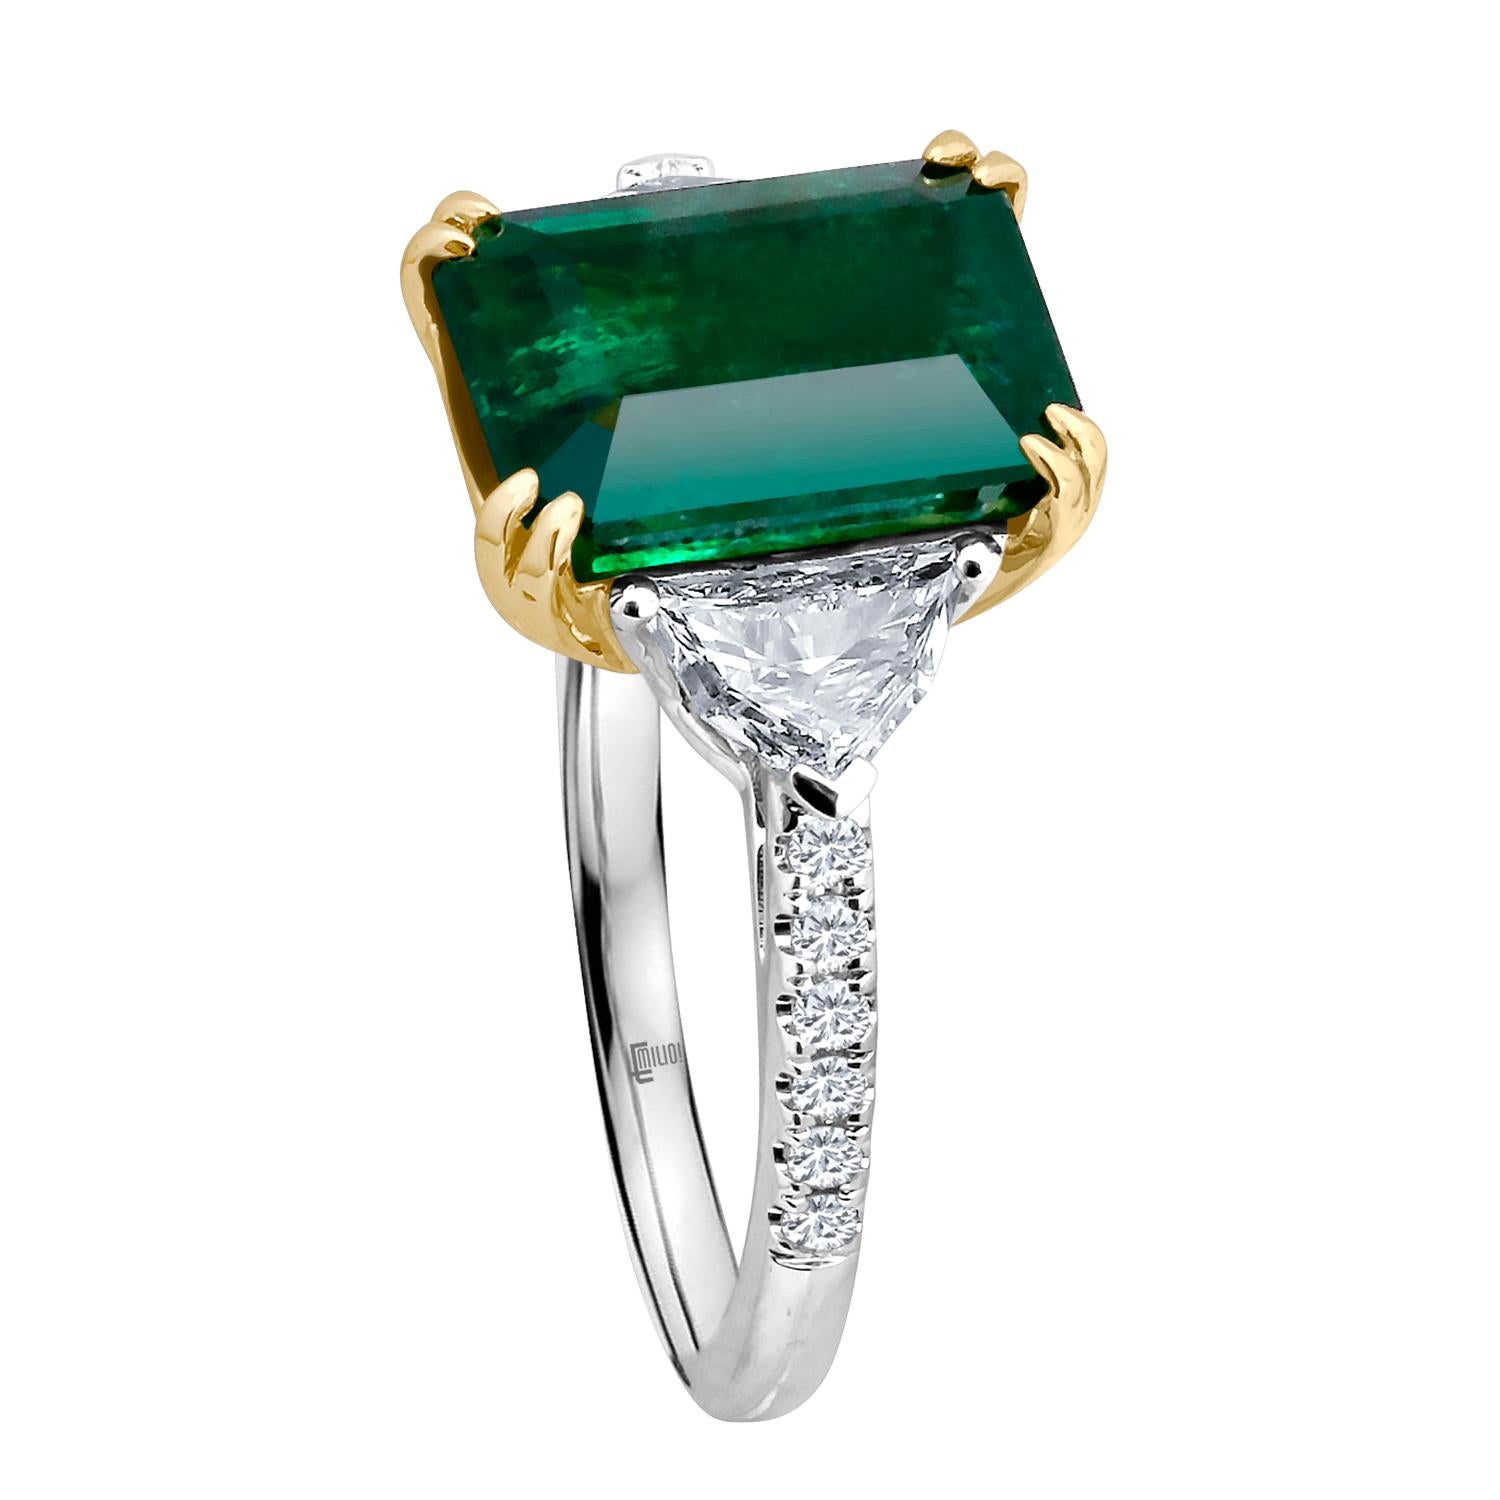 Hand made in the Emilio Jewelry Factory, A gorgeous deep green Certified Emerald cut Zambian Genuine Emerald 4.50 Carats set in the center. The emerald is very clean and completely eye clean. The emerald is noted on the certificate as an Intense